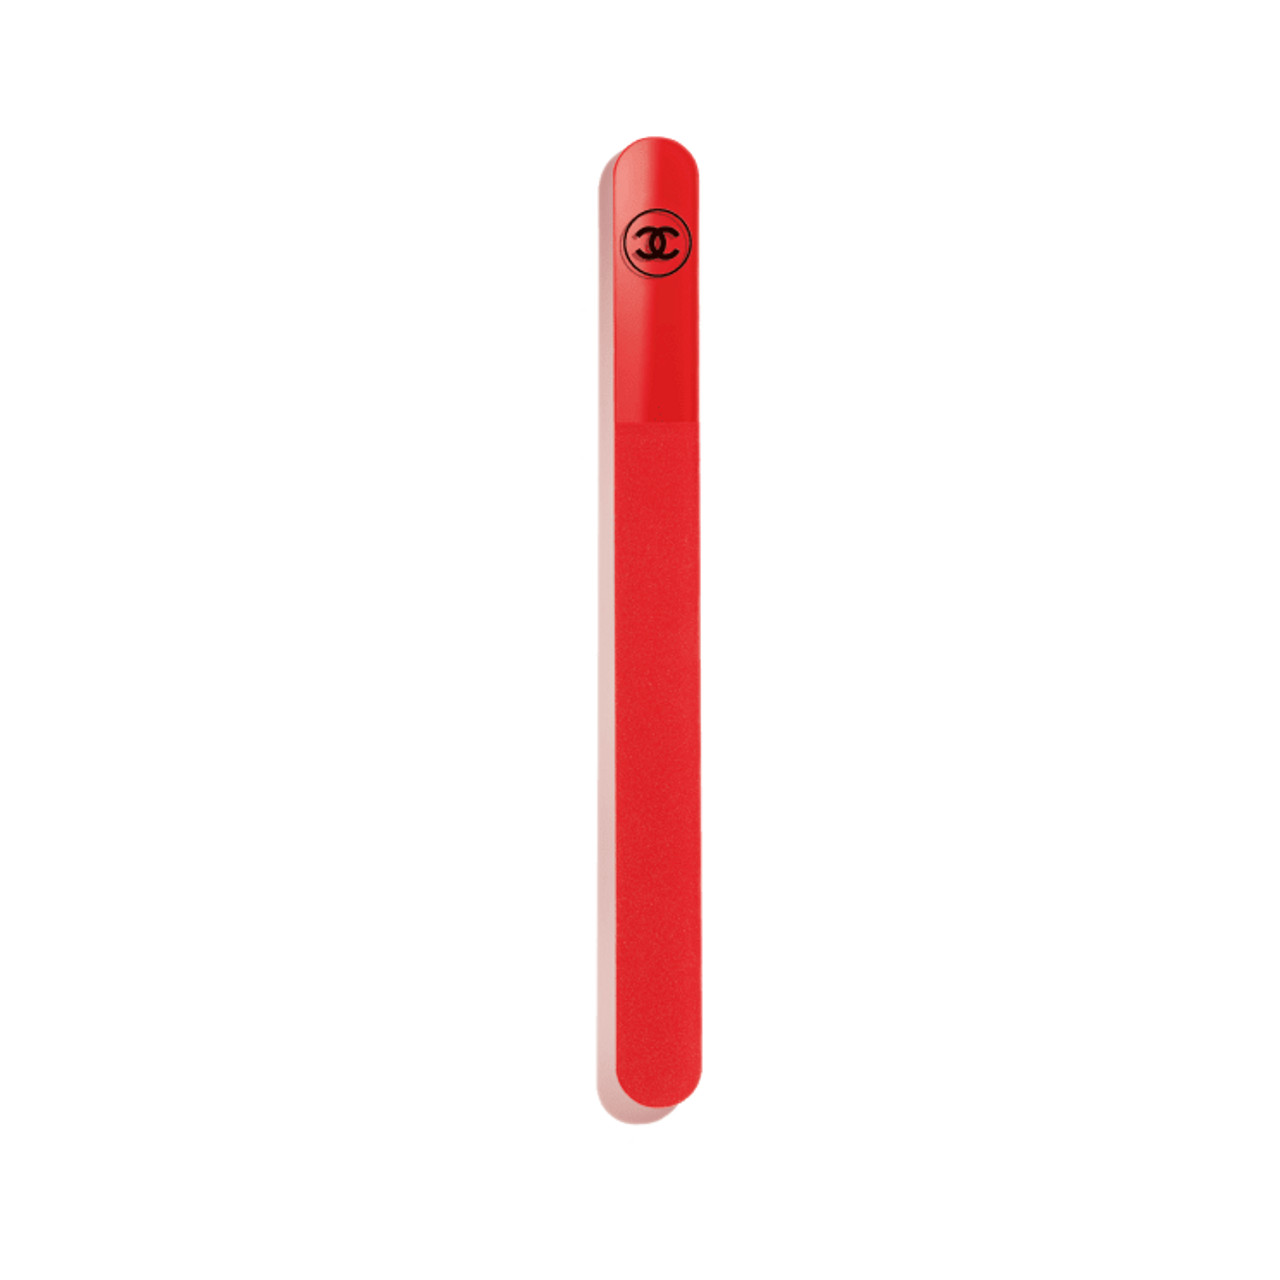 CHANEL The Nail File #147 Incendiaire